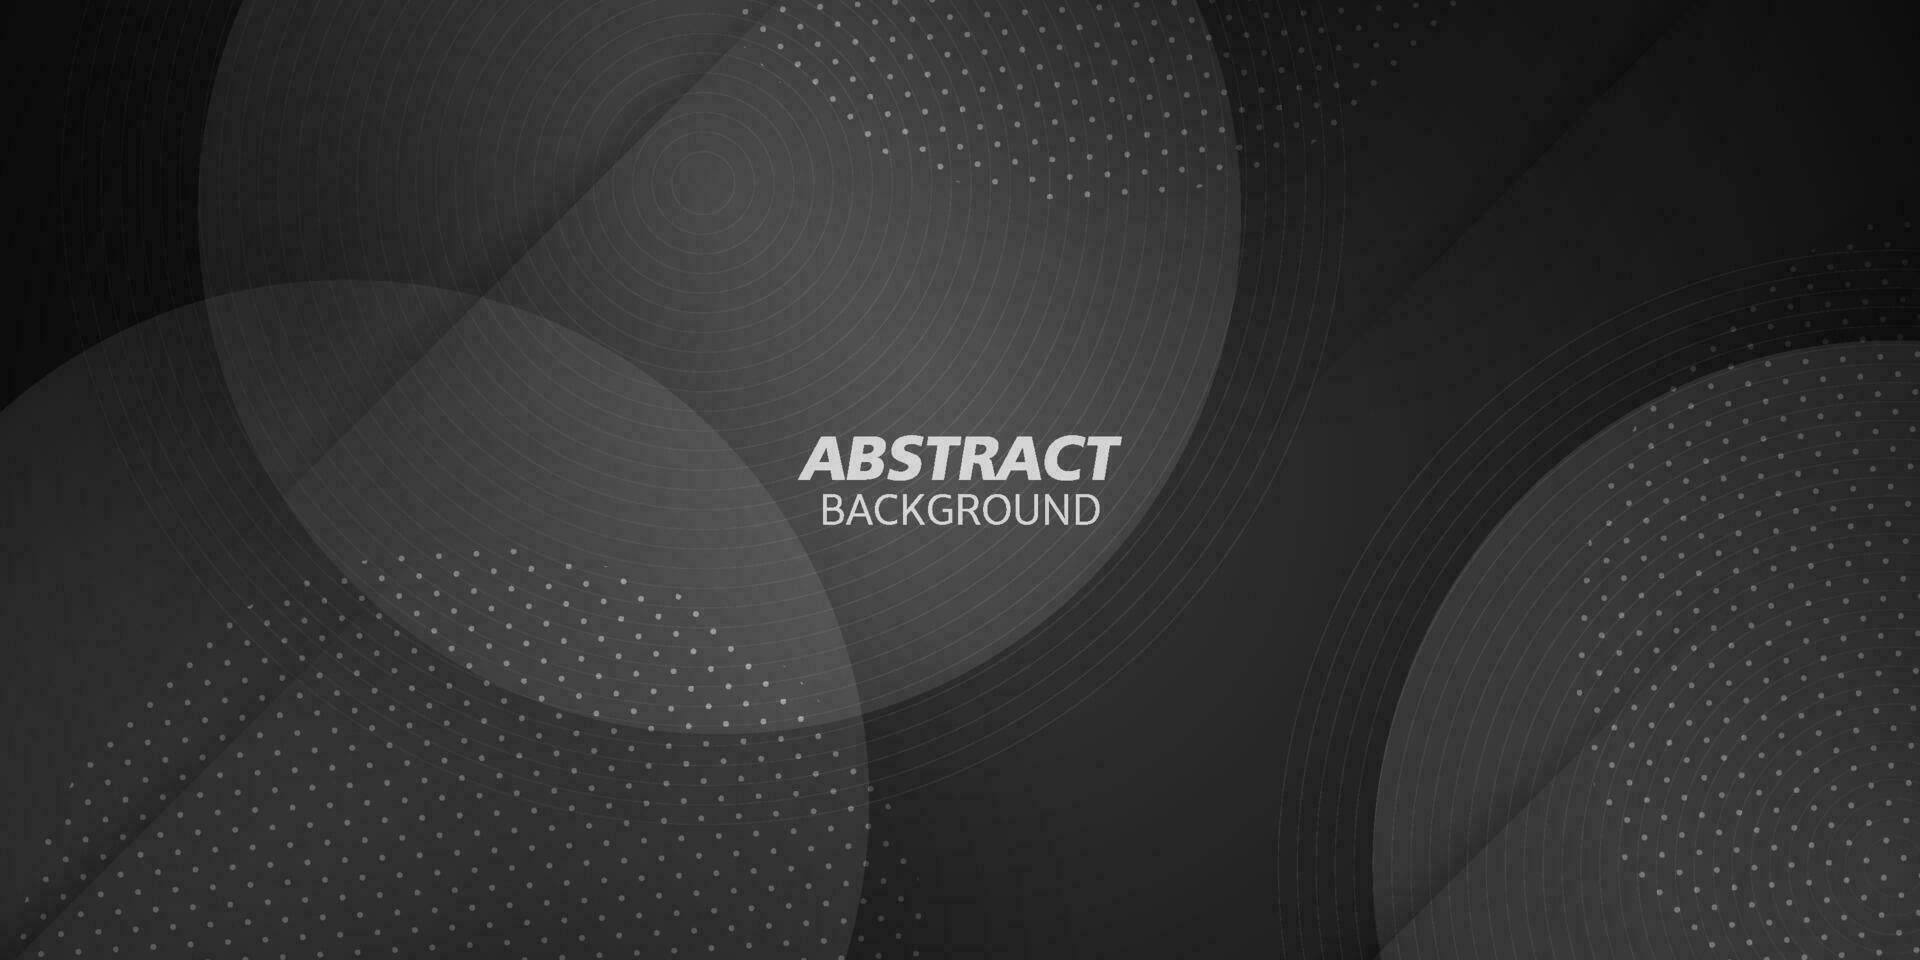 Modern abstract dark black and gray gradient illustration background with simple pattern. Cool design. Eps10 vector